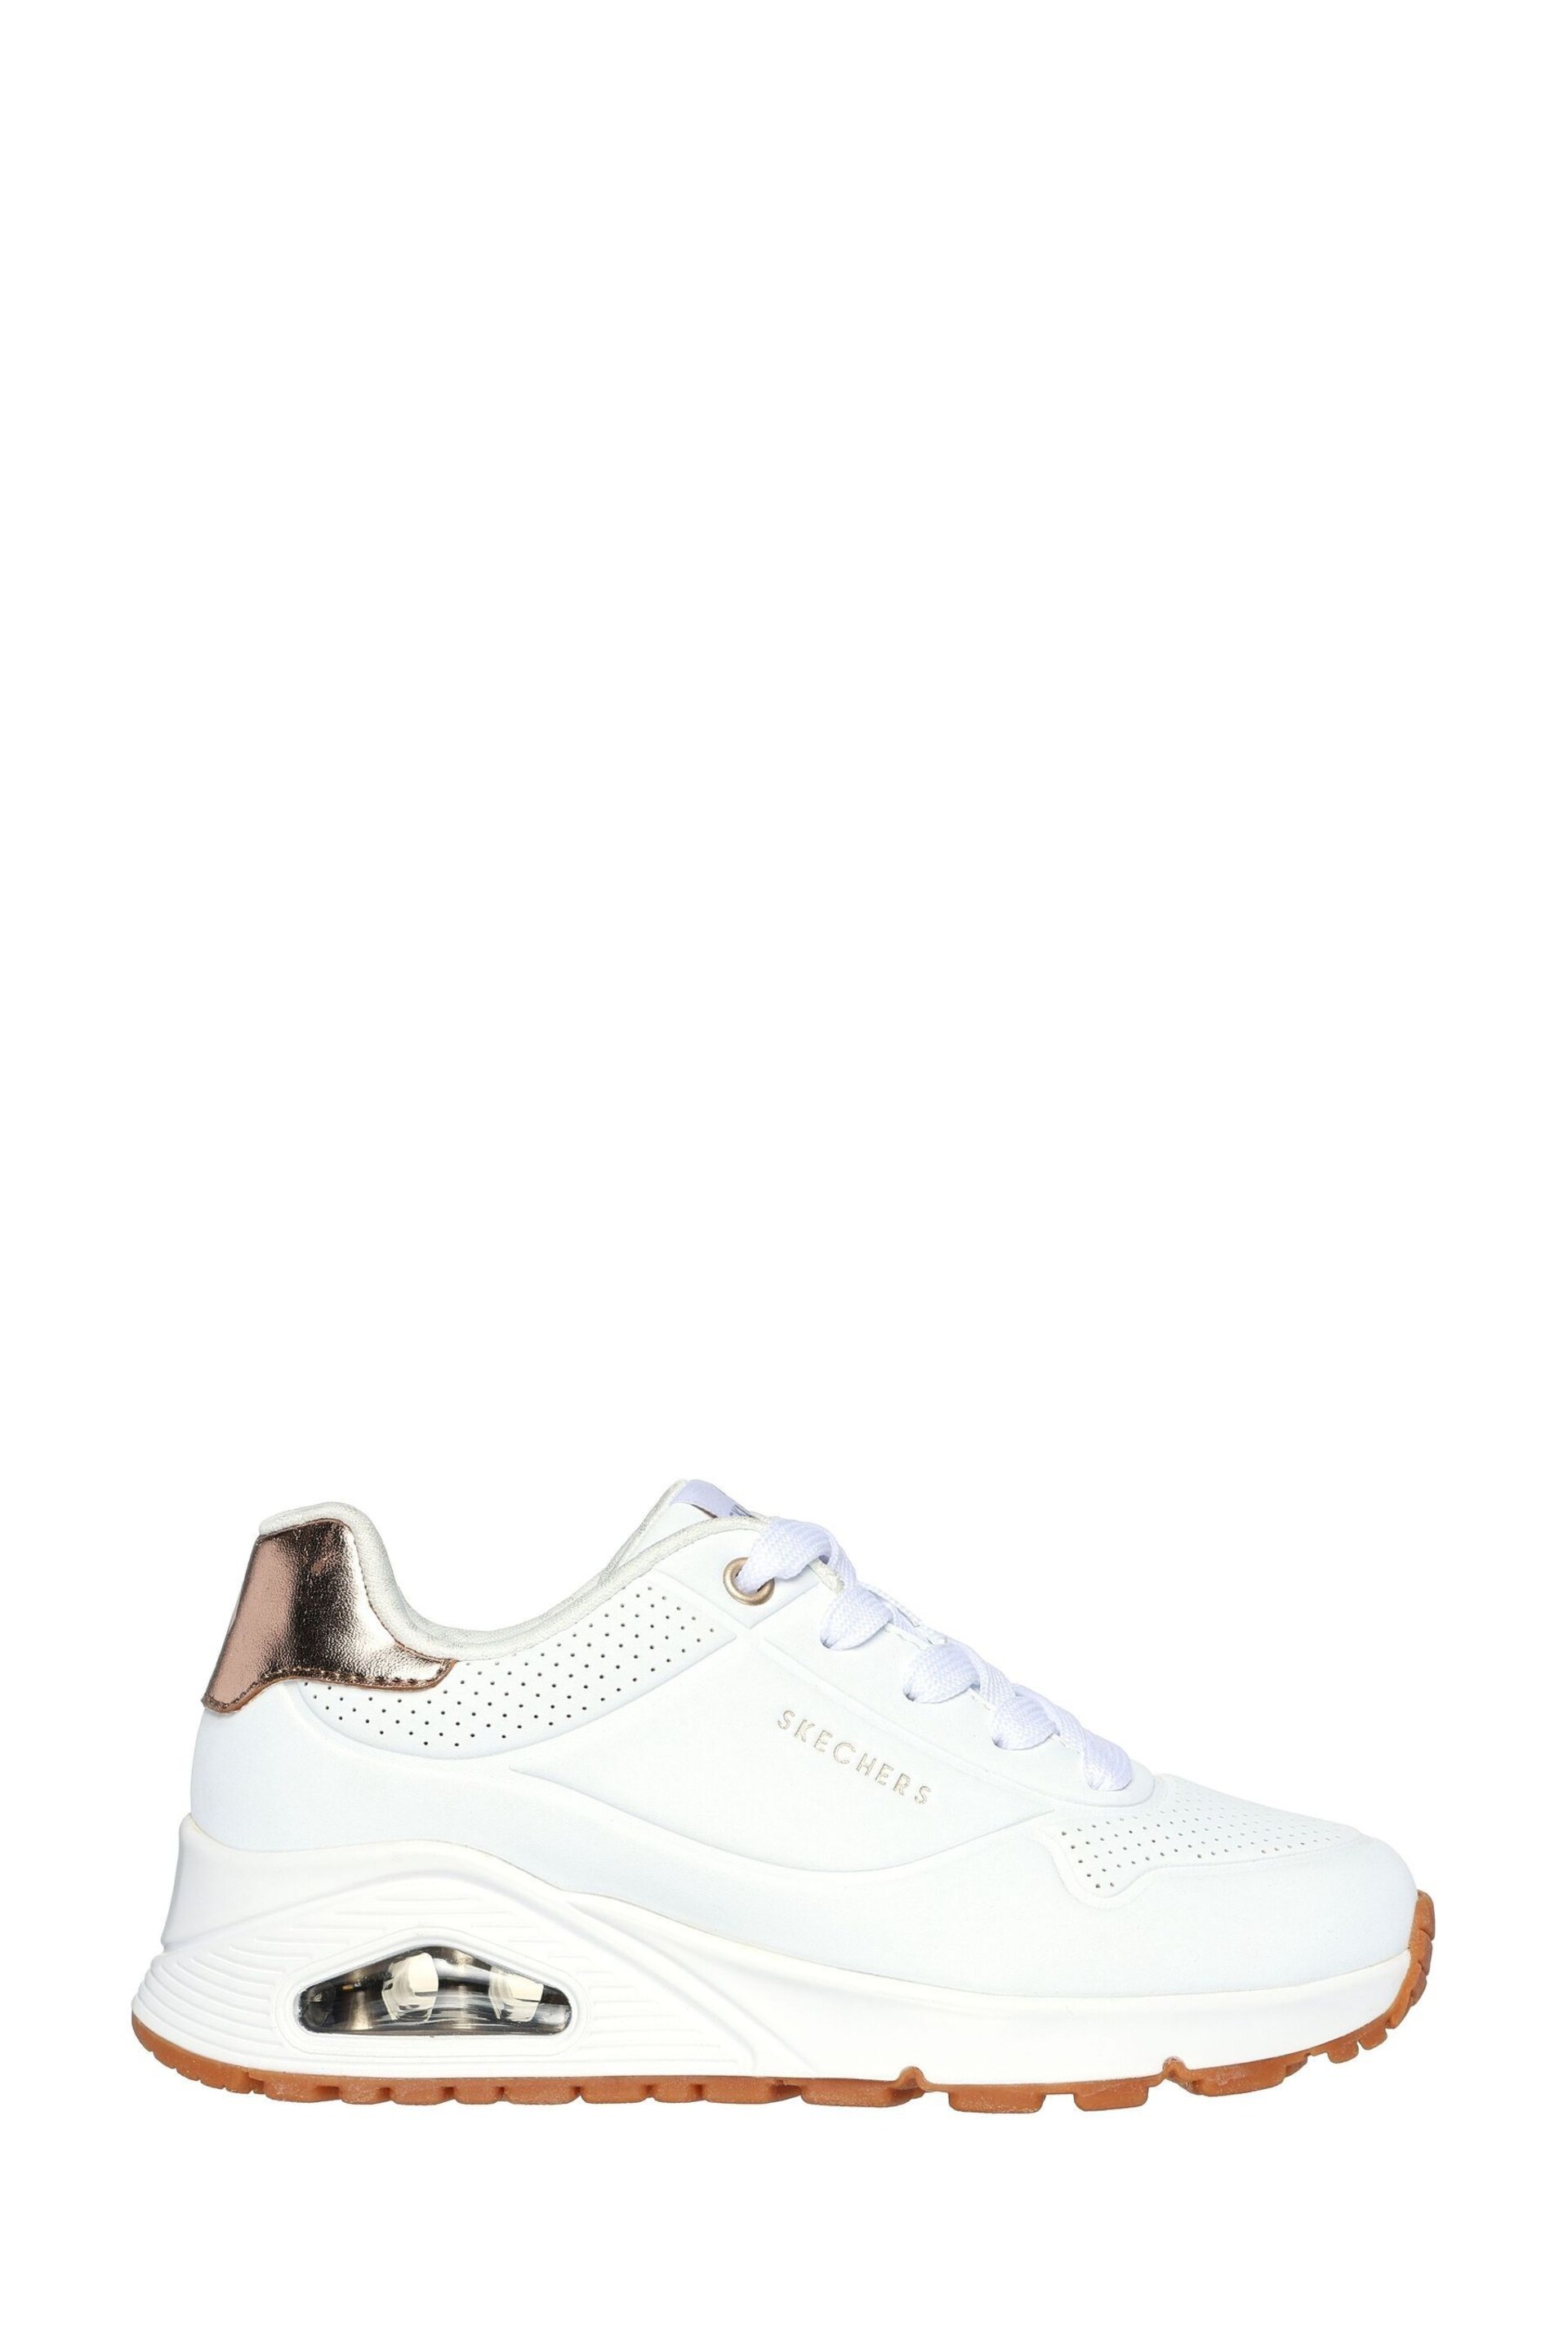 Skechers White Uno Gen1 Shimmer Away Trainers - Image 1 of 5